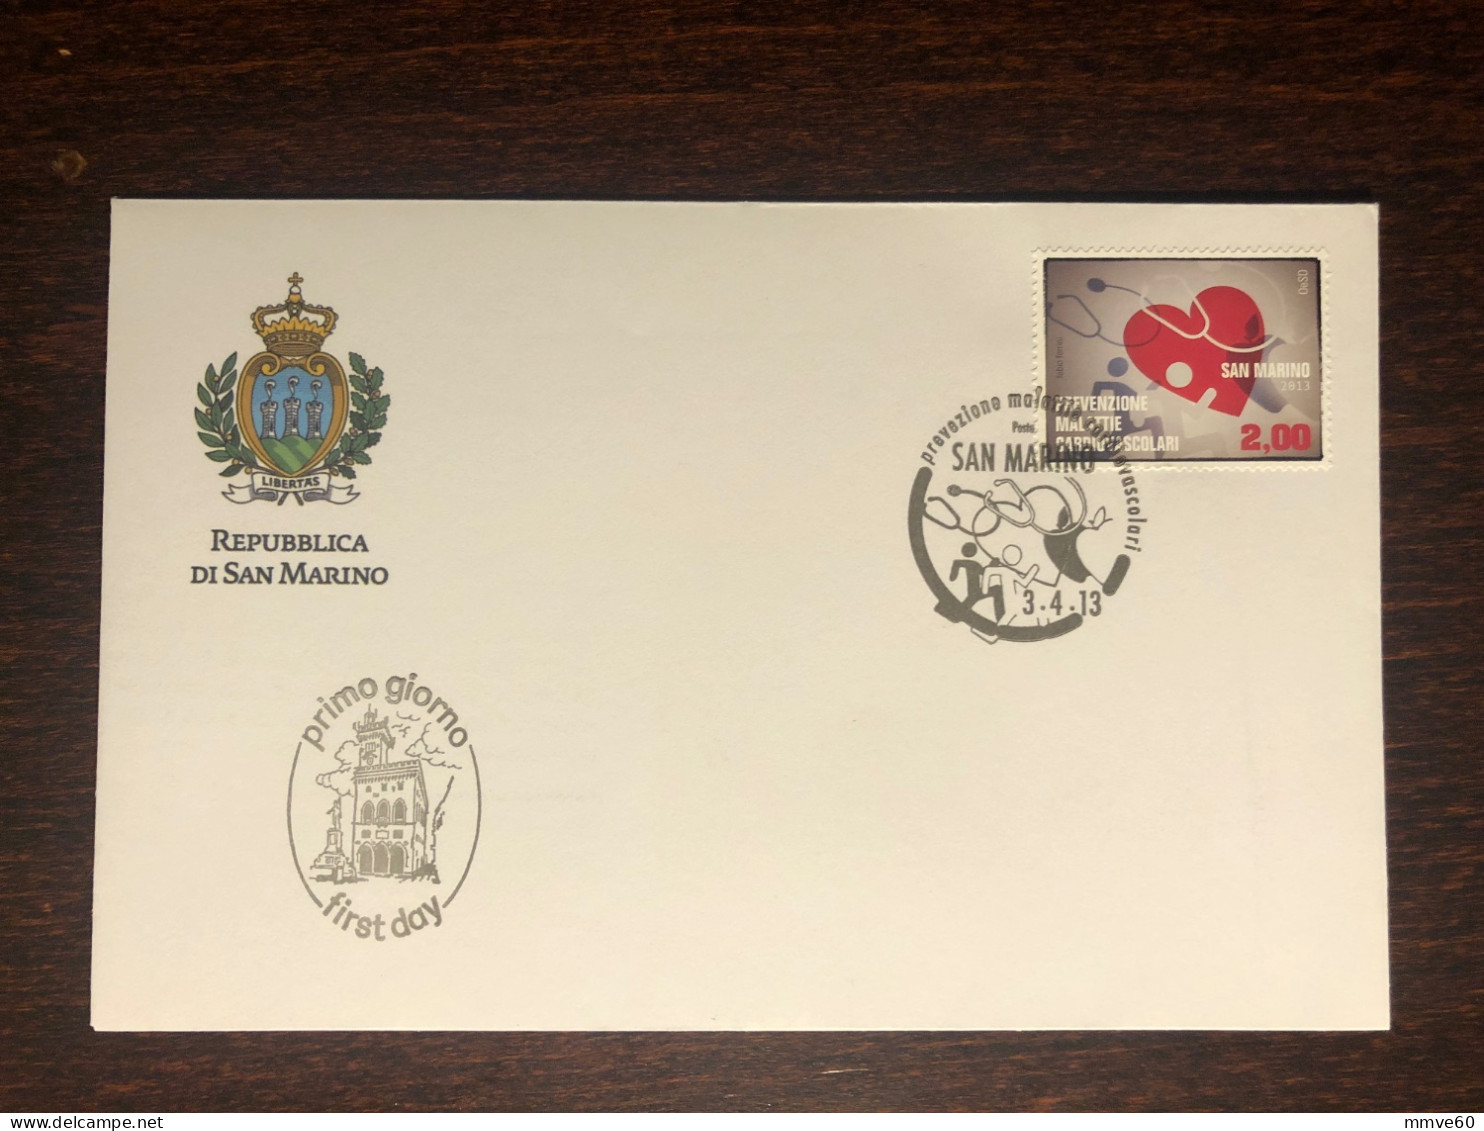 SAN MARINO FDC COVER 2013 YEAR HEART CARDIOLOGY HEALTH MEDICINE STAMPS - FDC